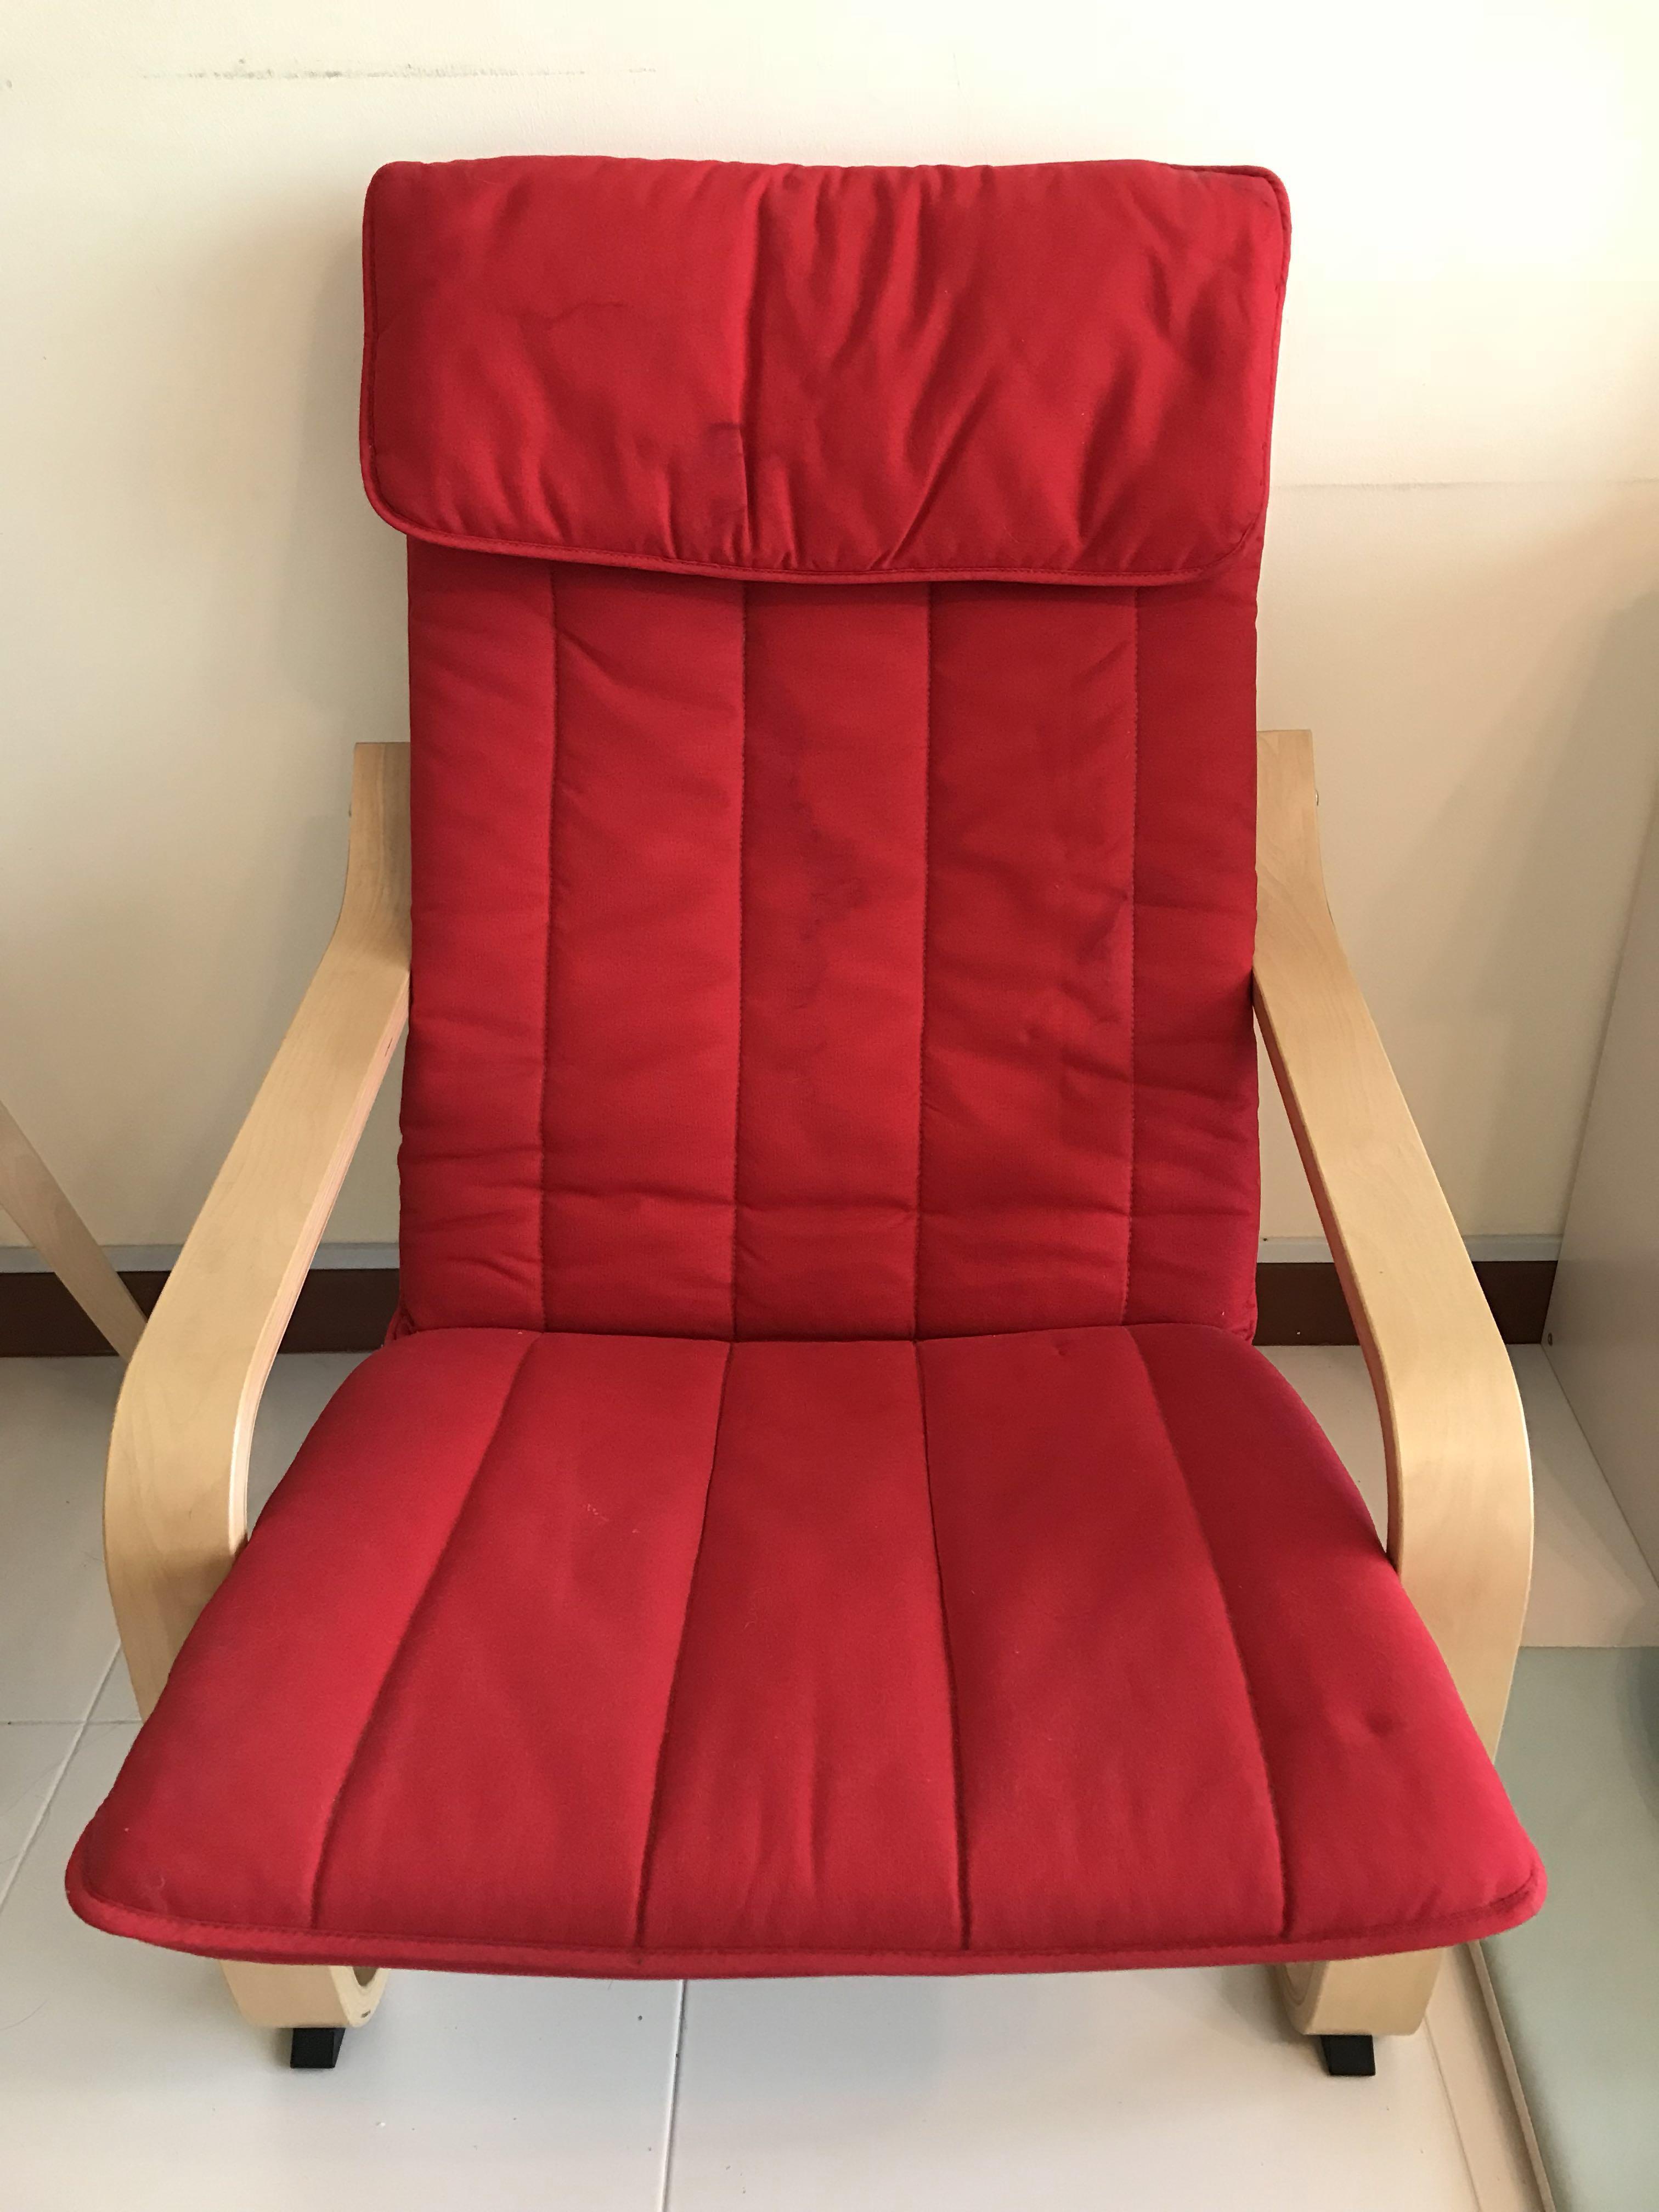 https://media.karousell.com/media/photos/products/2018/06/27/ikea_poang_chair_cushion_plus_cover_only_red_1530108706_bfc8a55d_progressive.jpg